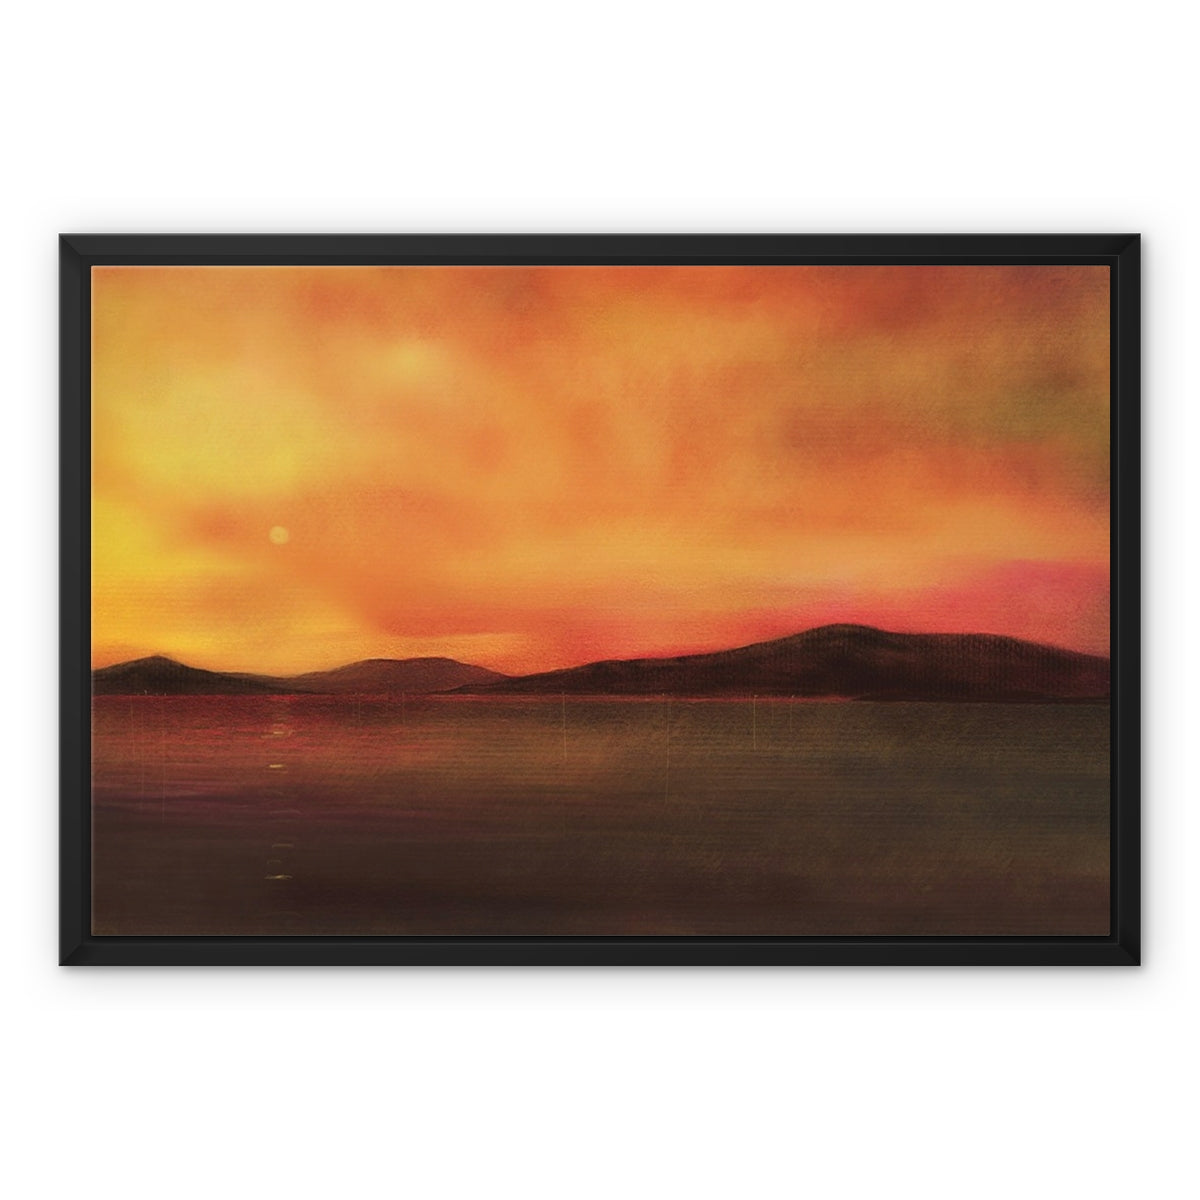 Isle Of Harris Sunset Painting | Framed Canvas From Scotland-Floating Framed Canvas Prints-Hebridean Islands Art Gallery-24"x18"-Black Frame-Paintings, Prints, Homeware, Art Gifts From Scotland By Scottish Artist Kevin Hunter